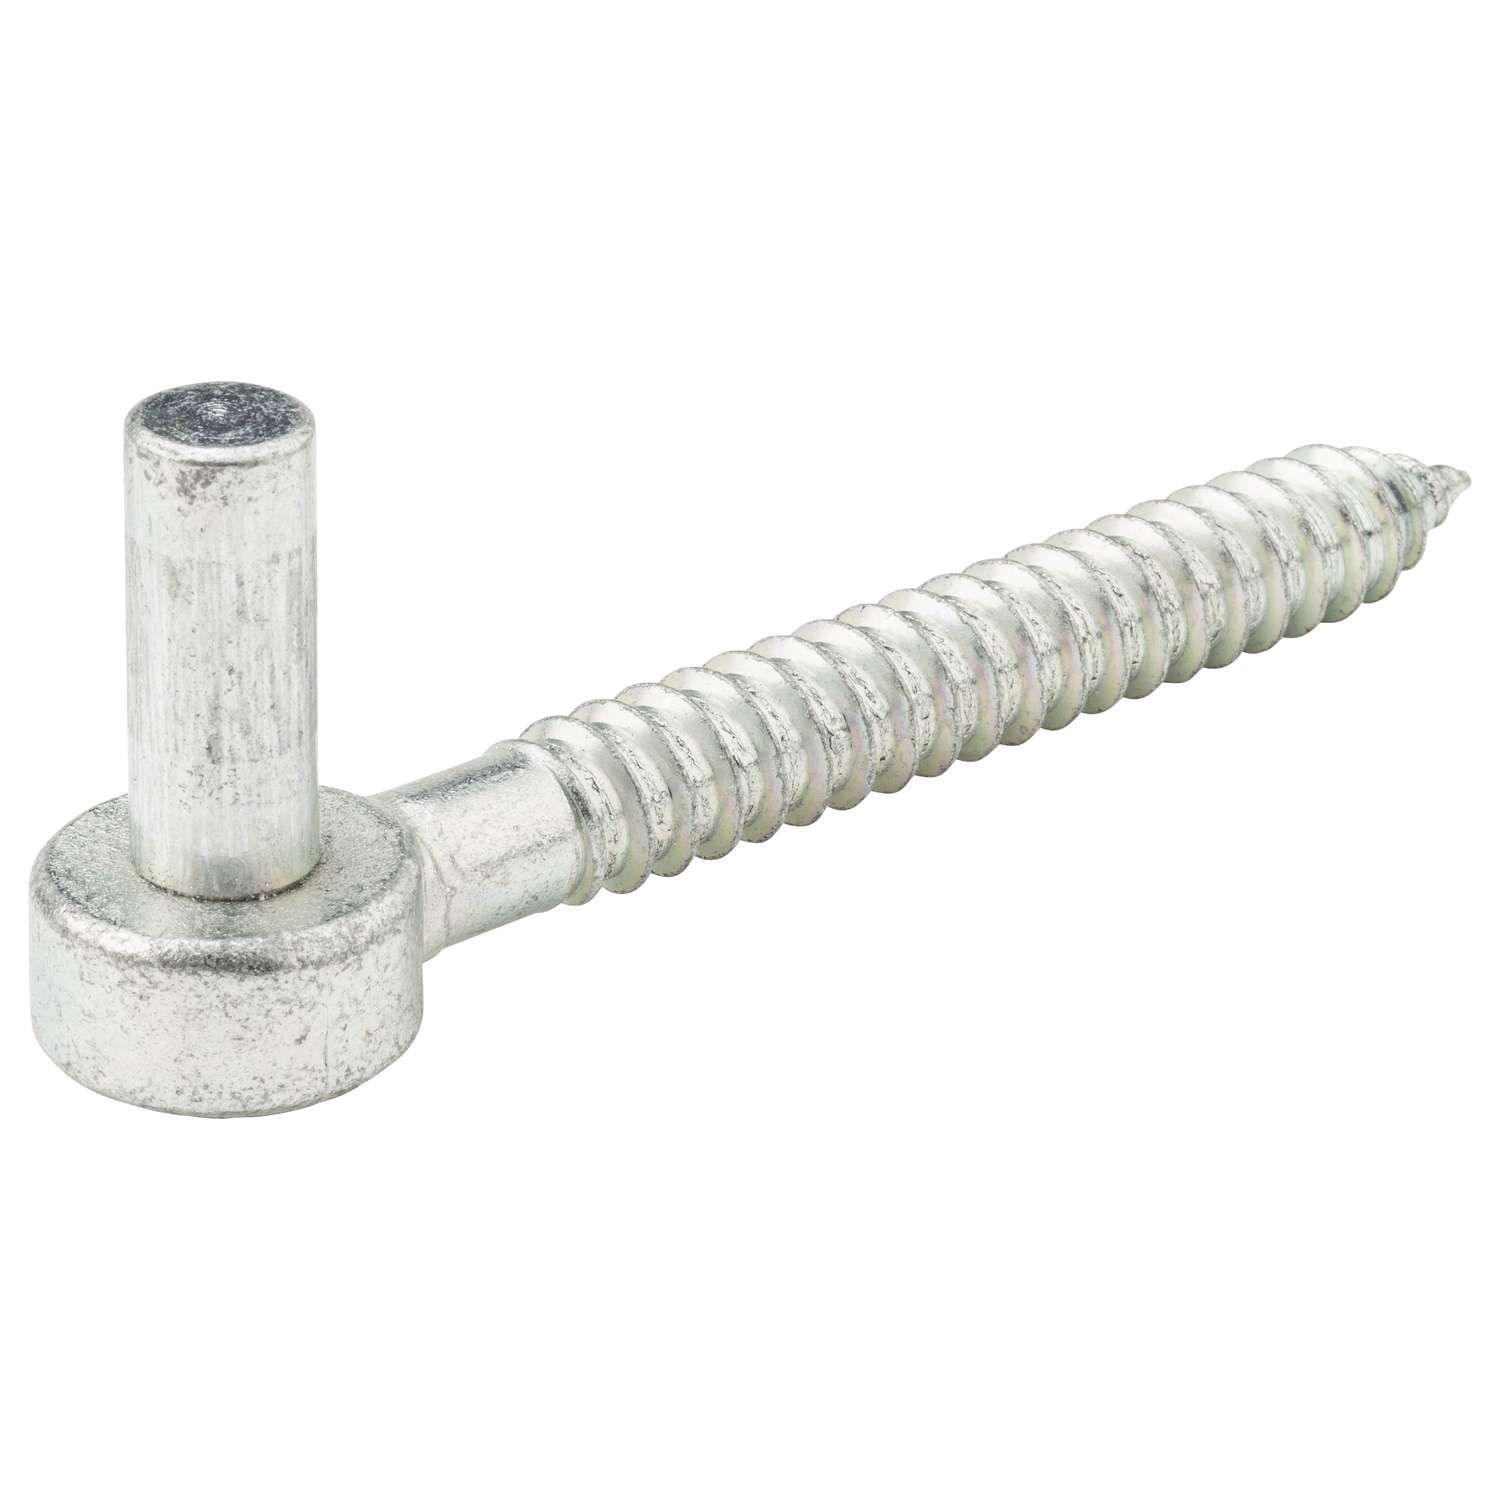 HEAVY DUTY SCREW HOOKS WITH CROSS SLOT GALVANISED STEEL FOR MACHINE ASSEMBLY 